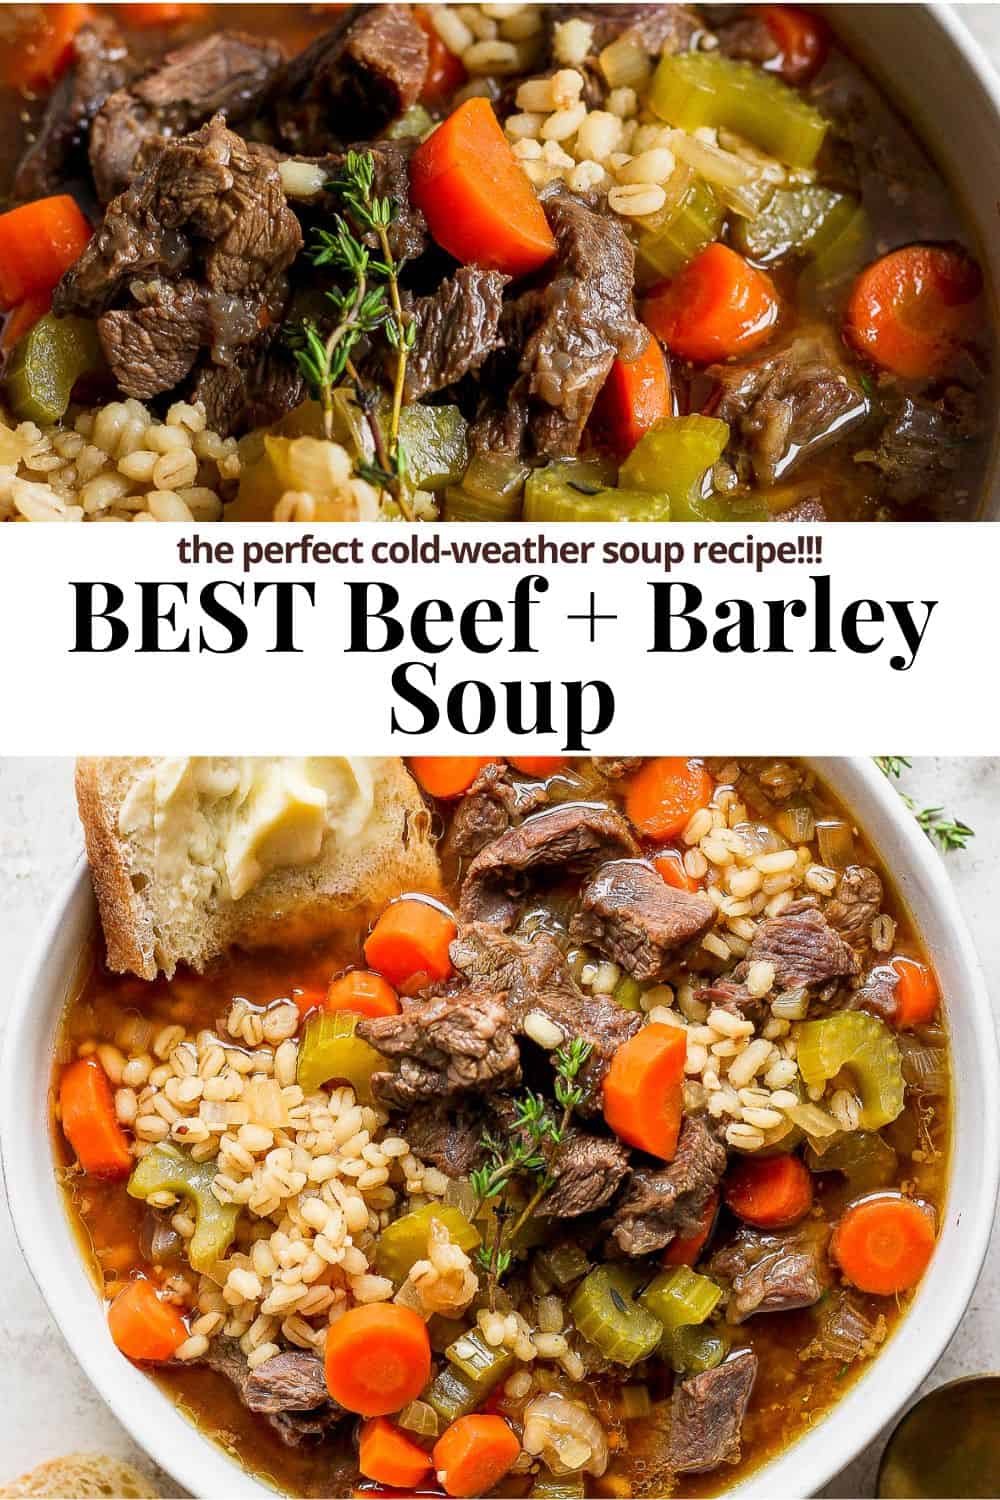 Pinterest image showing beef and barley soup with the title "Best beef + barley soup. The perfect cold-weather soup recipe!!!